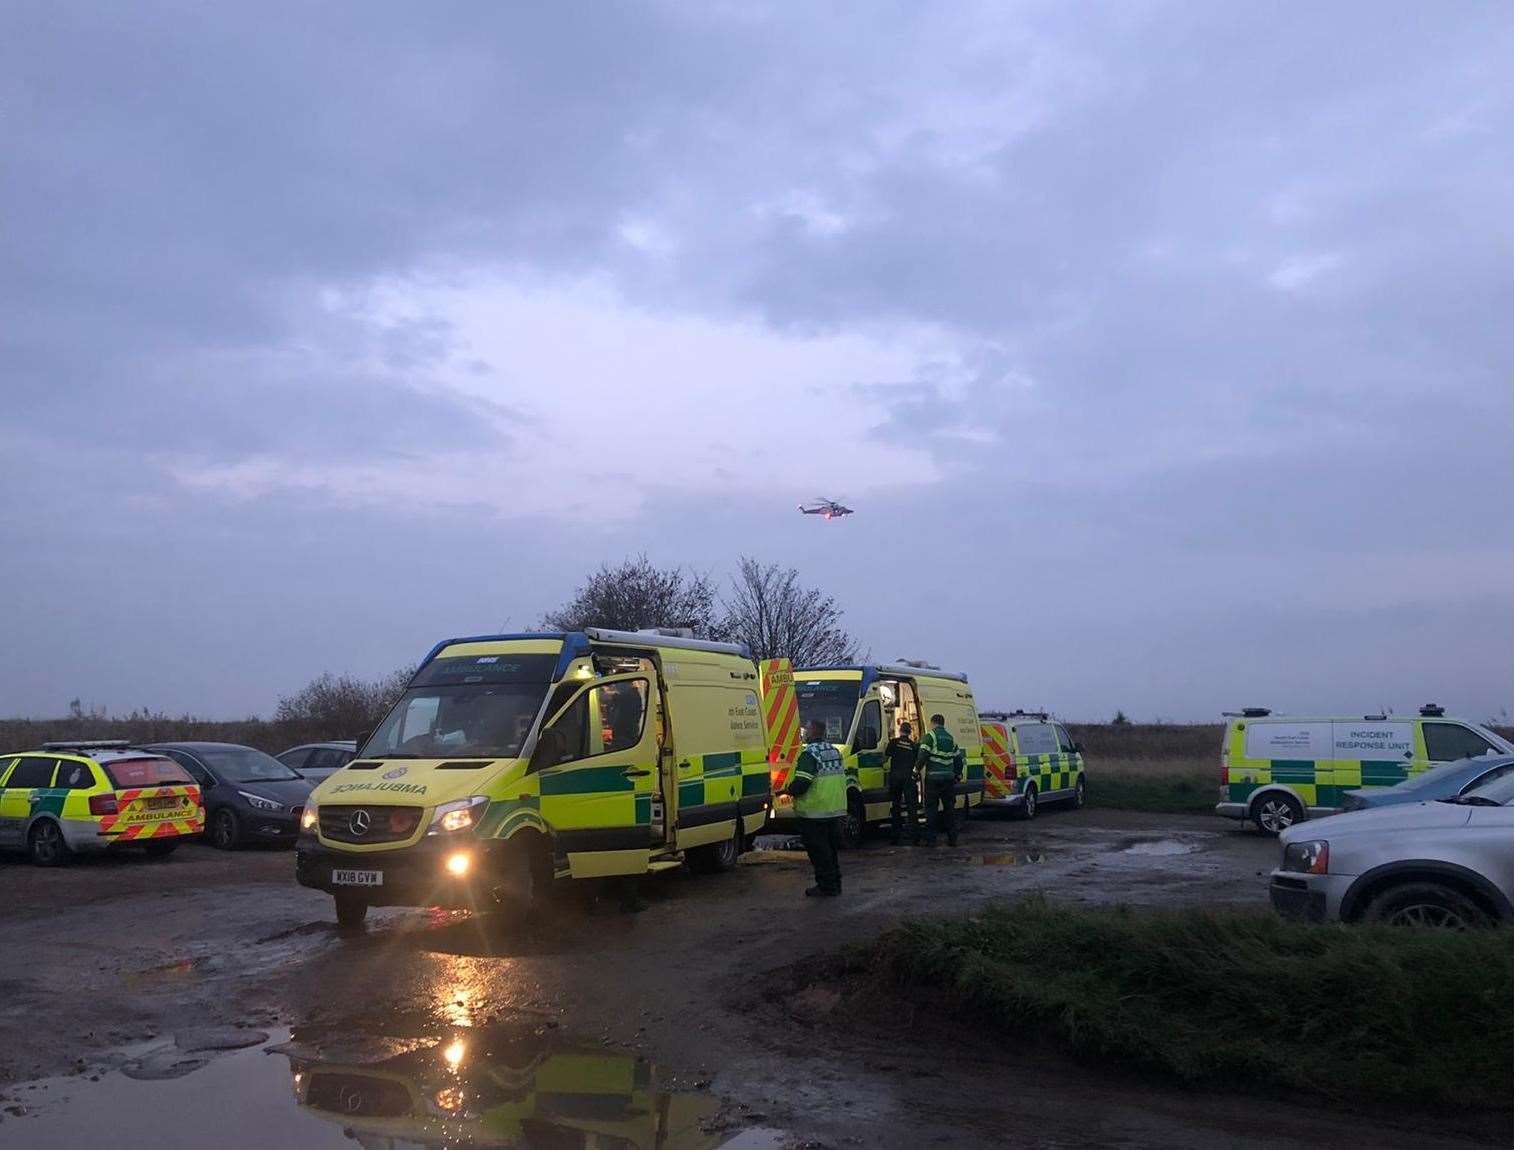 At least six ambulances were called to the scene